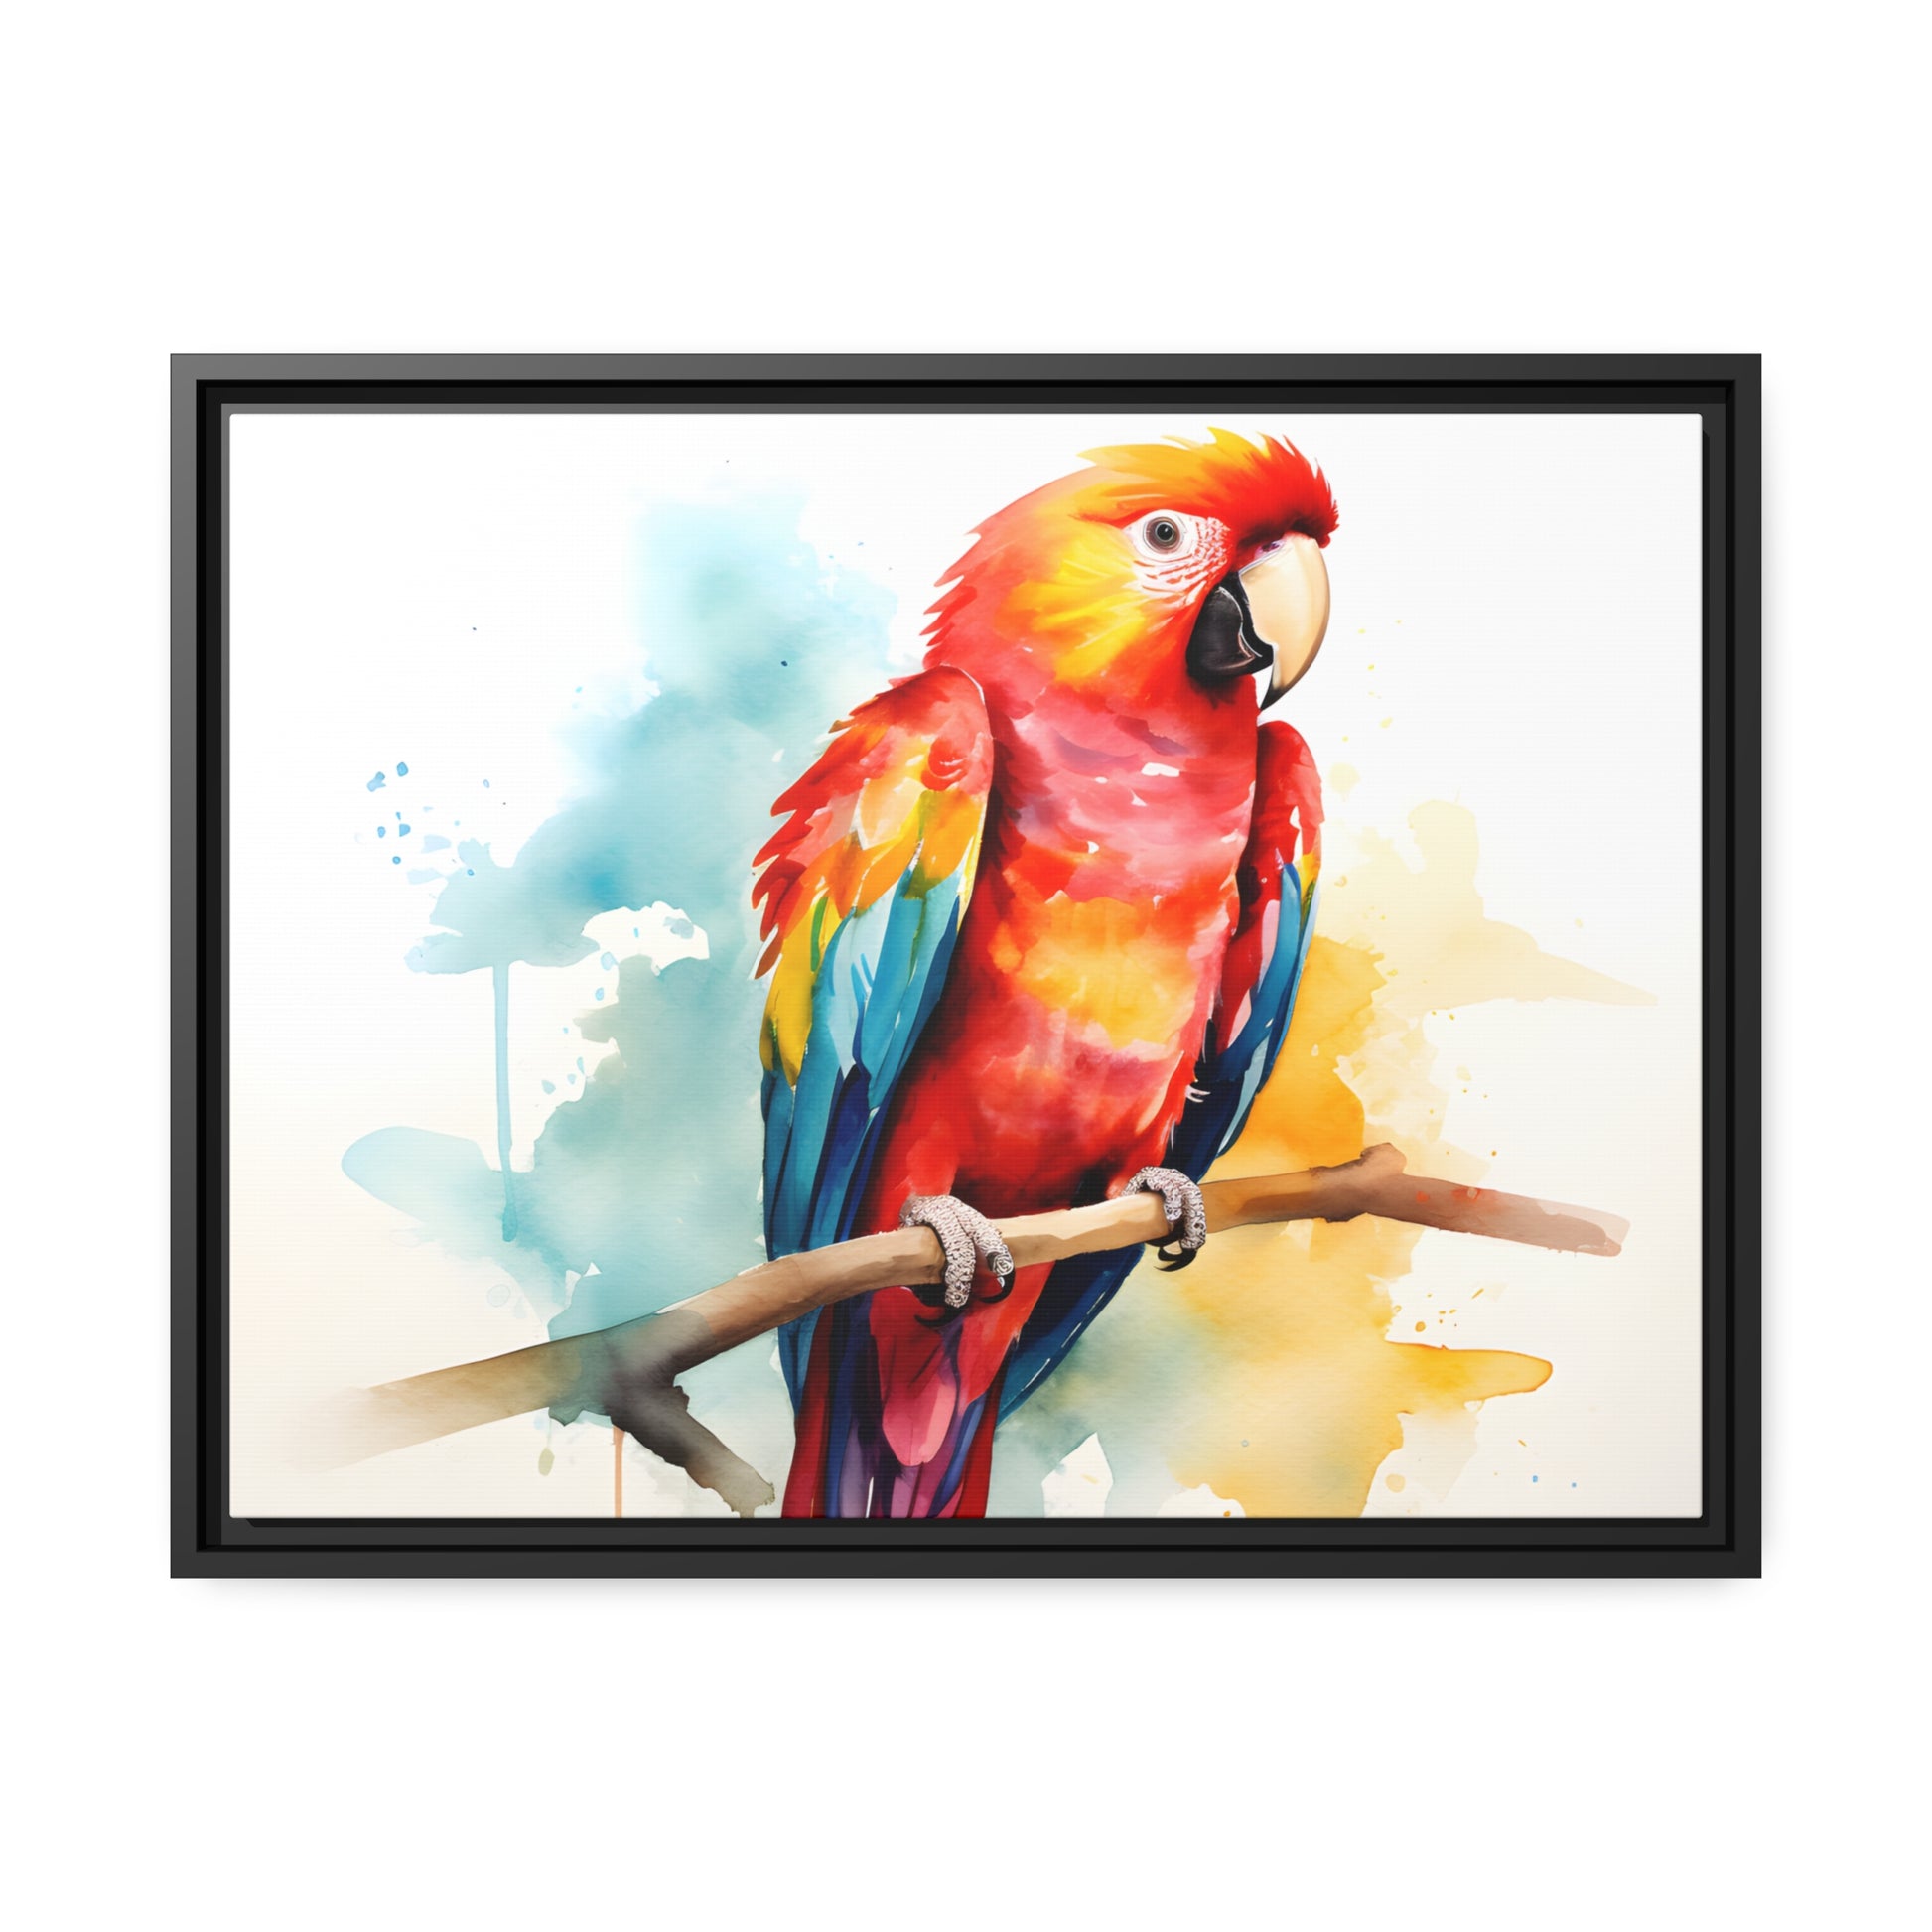 Framed Canvas Artwork Bright Red Parrot With Rainbow Wings Perched On A Tree Branch Nature Influenced Water Color Painting Style